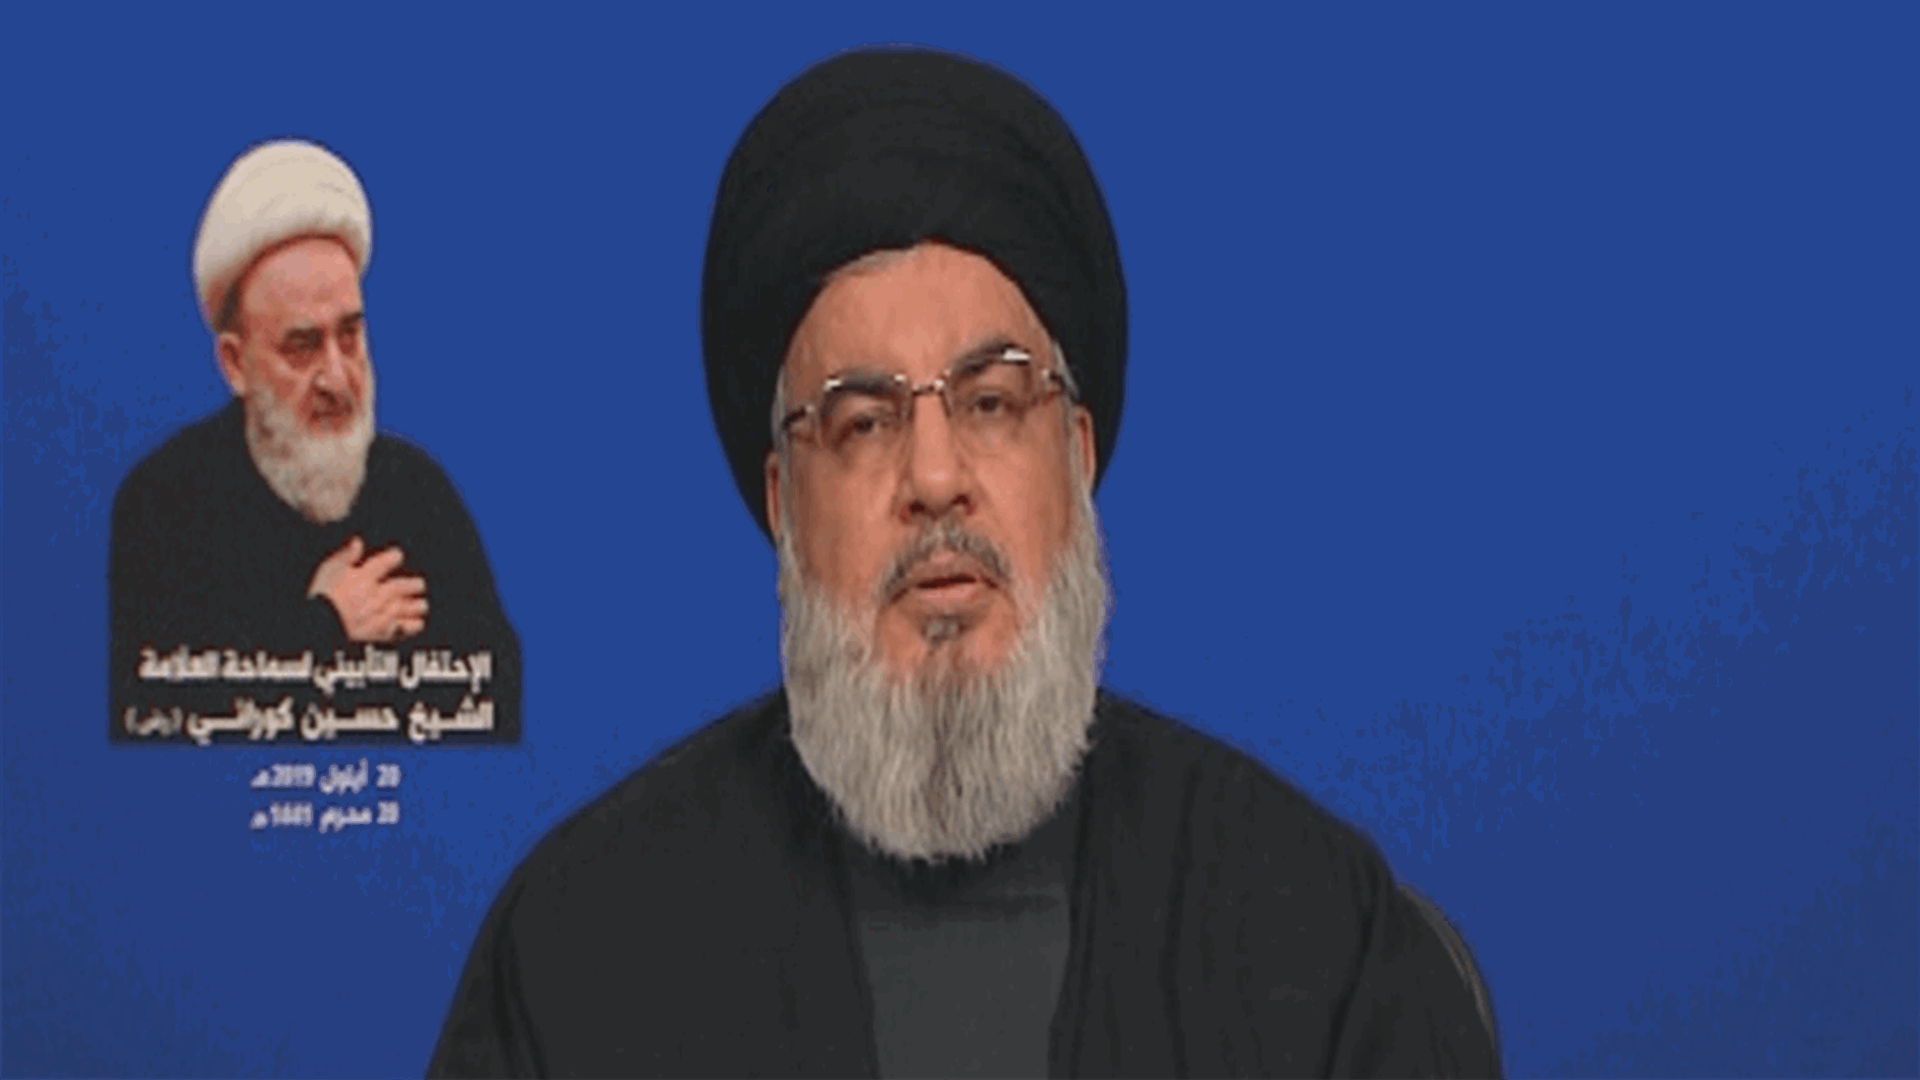 Nasrallah: Those who collaborate with the enemy must be punished in accordance with their crime